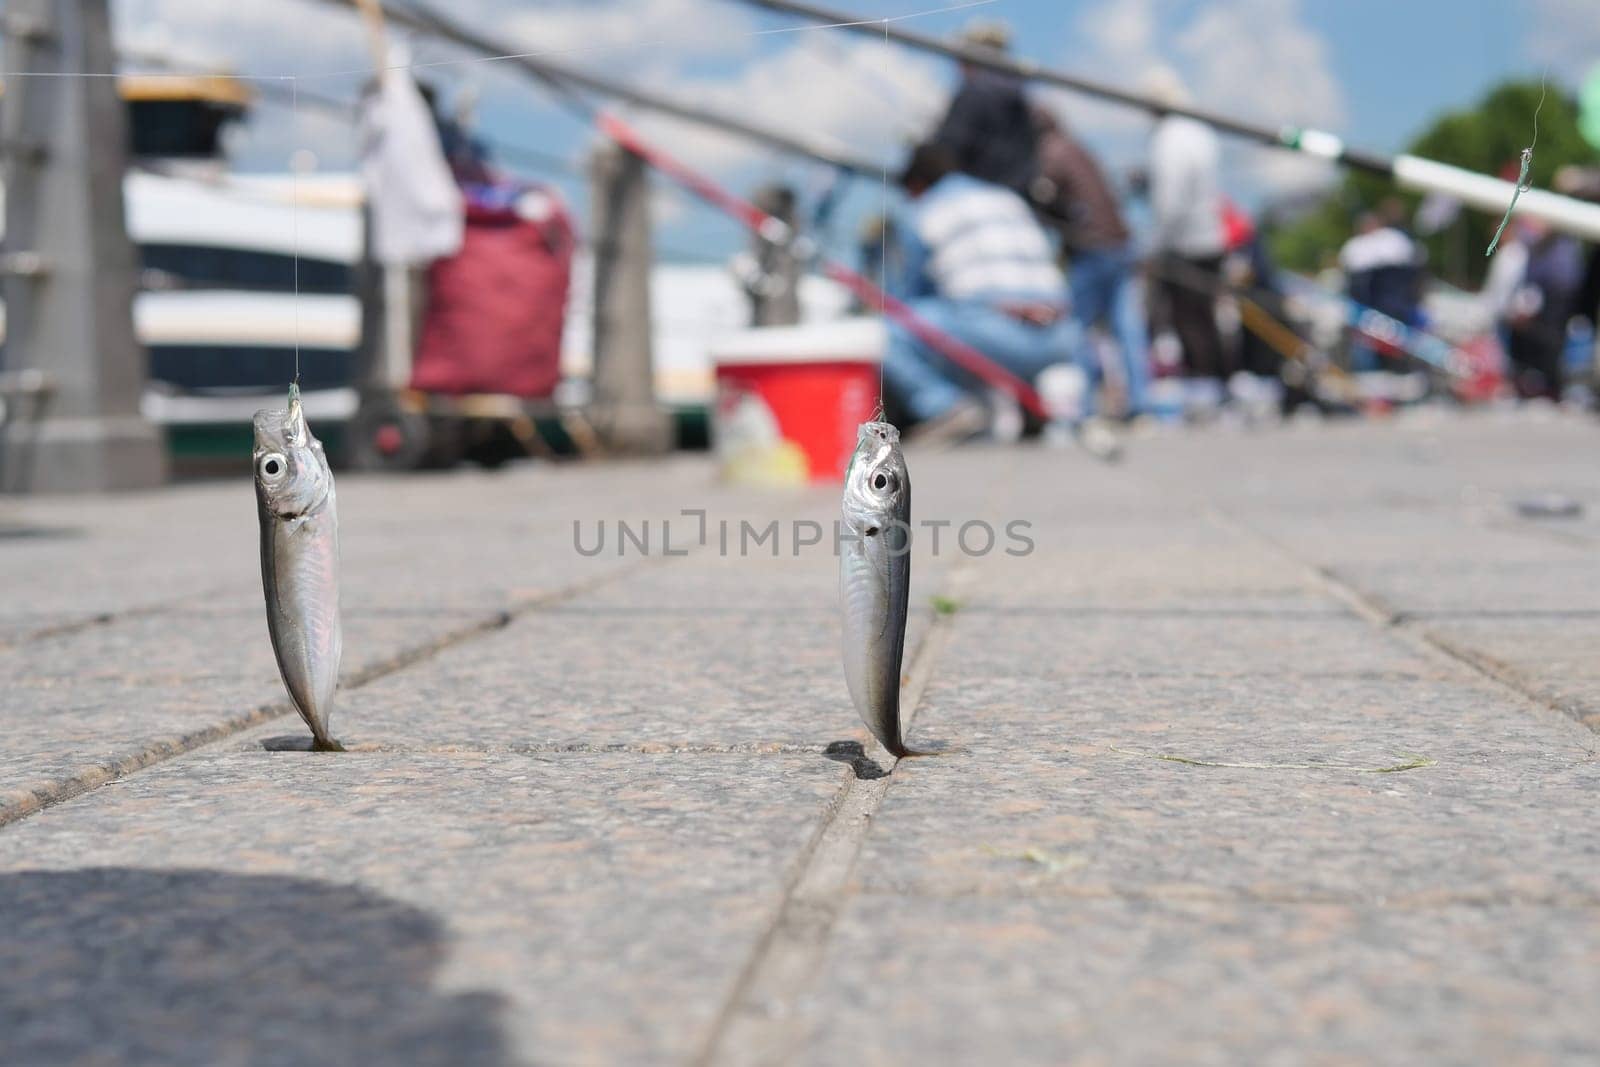 Two small fish suspended from a fishing rod on a sidewalk beside a road.